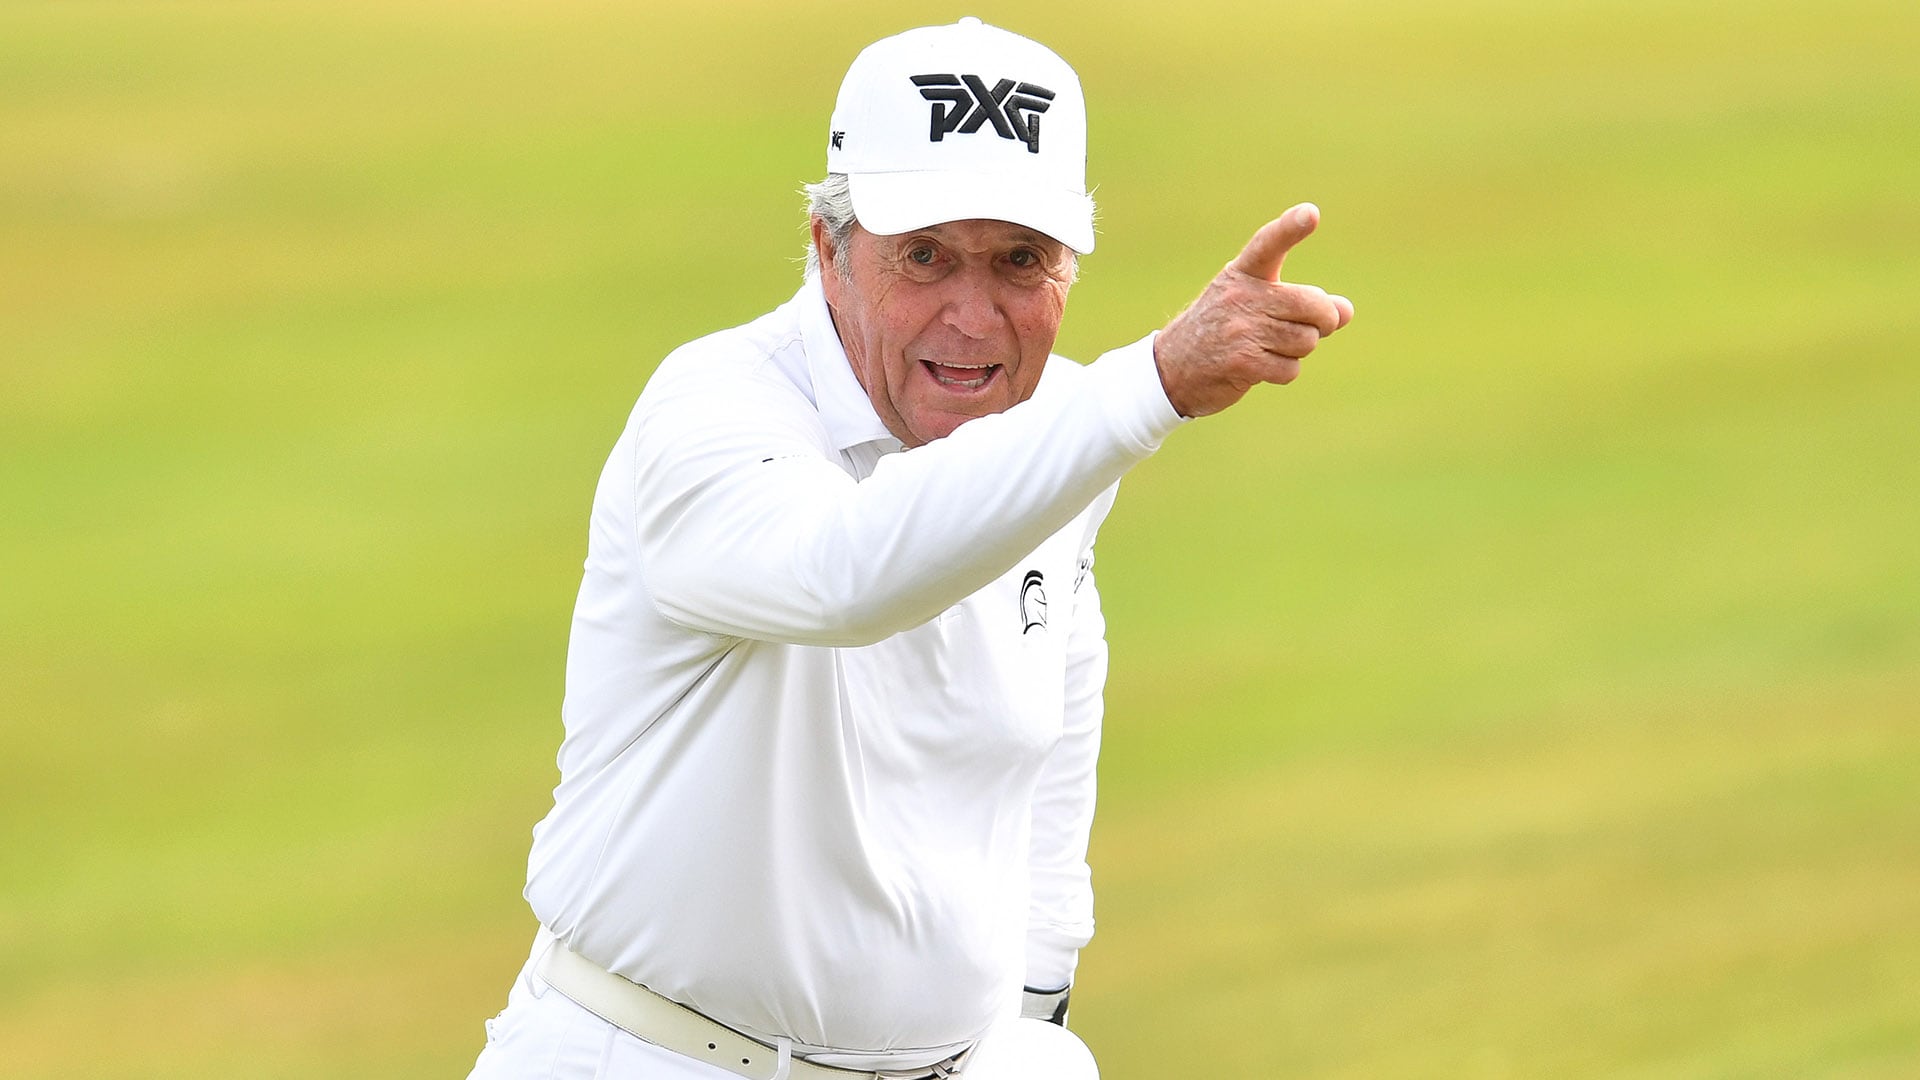 Gary Player wearing a white long sleeves and white cap while raising his arm